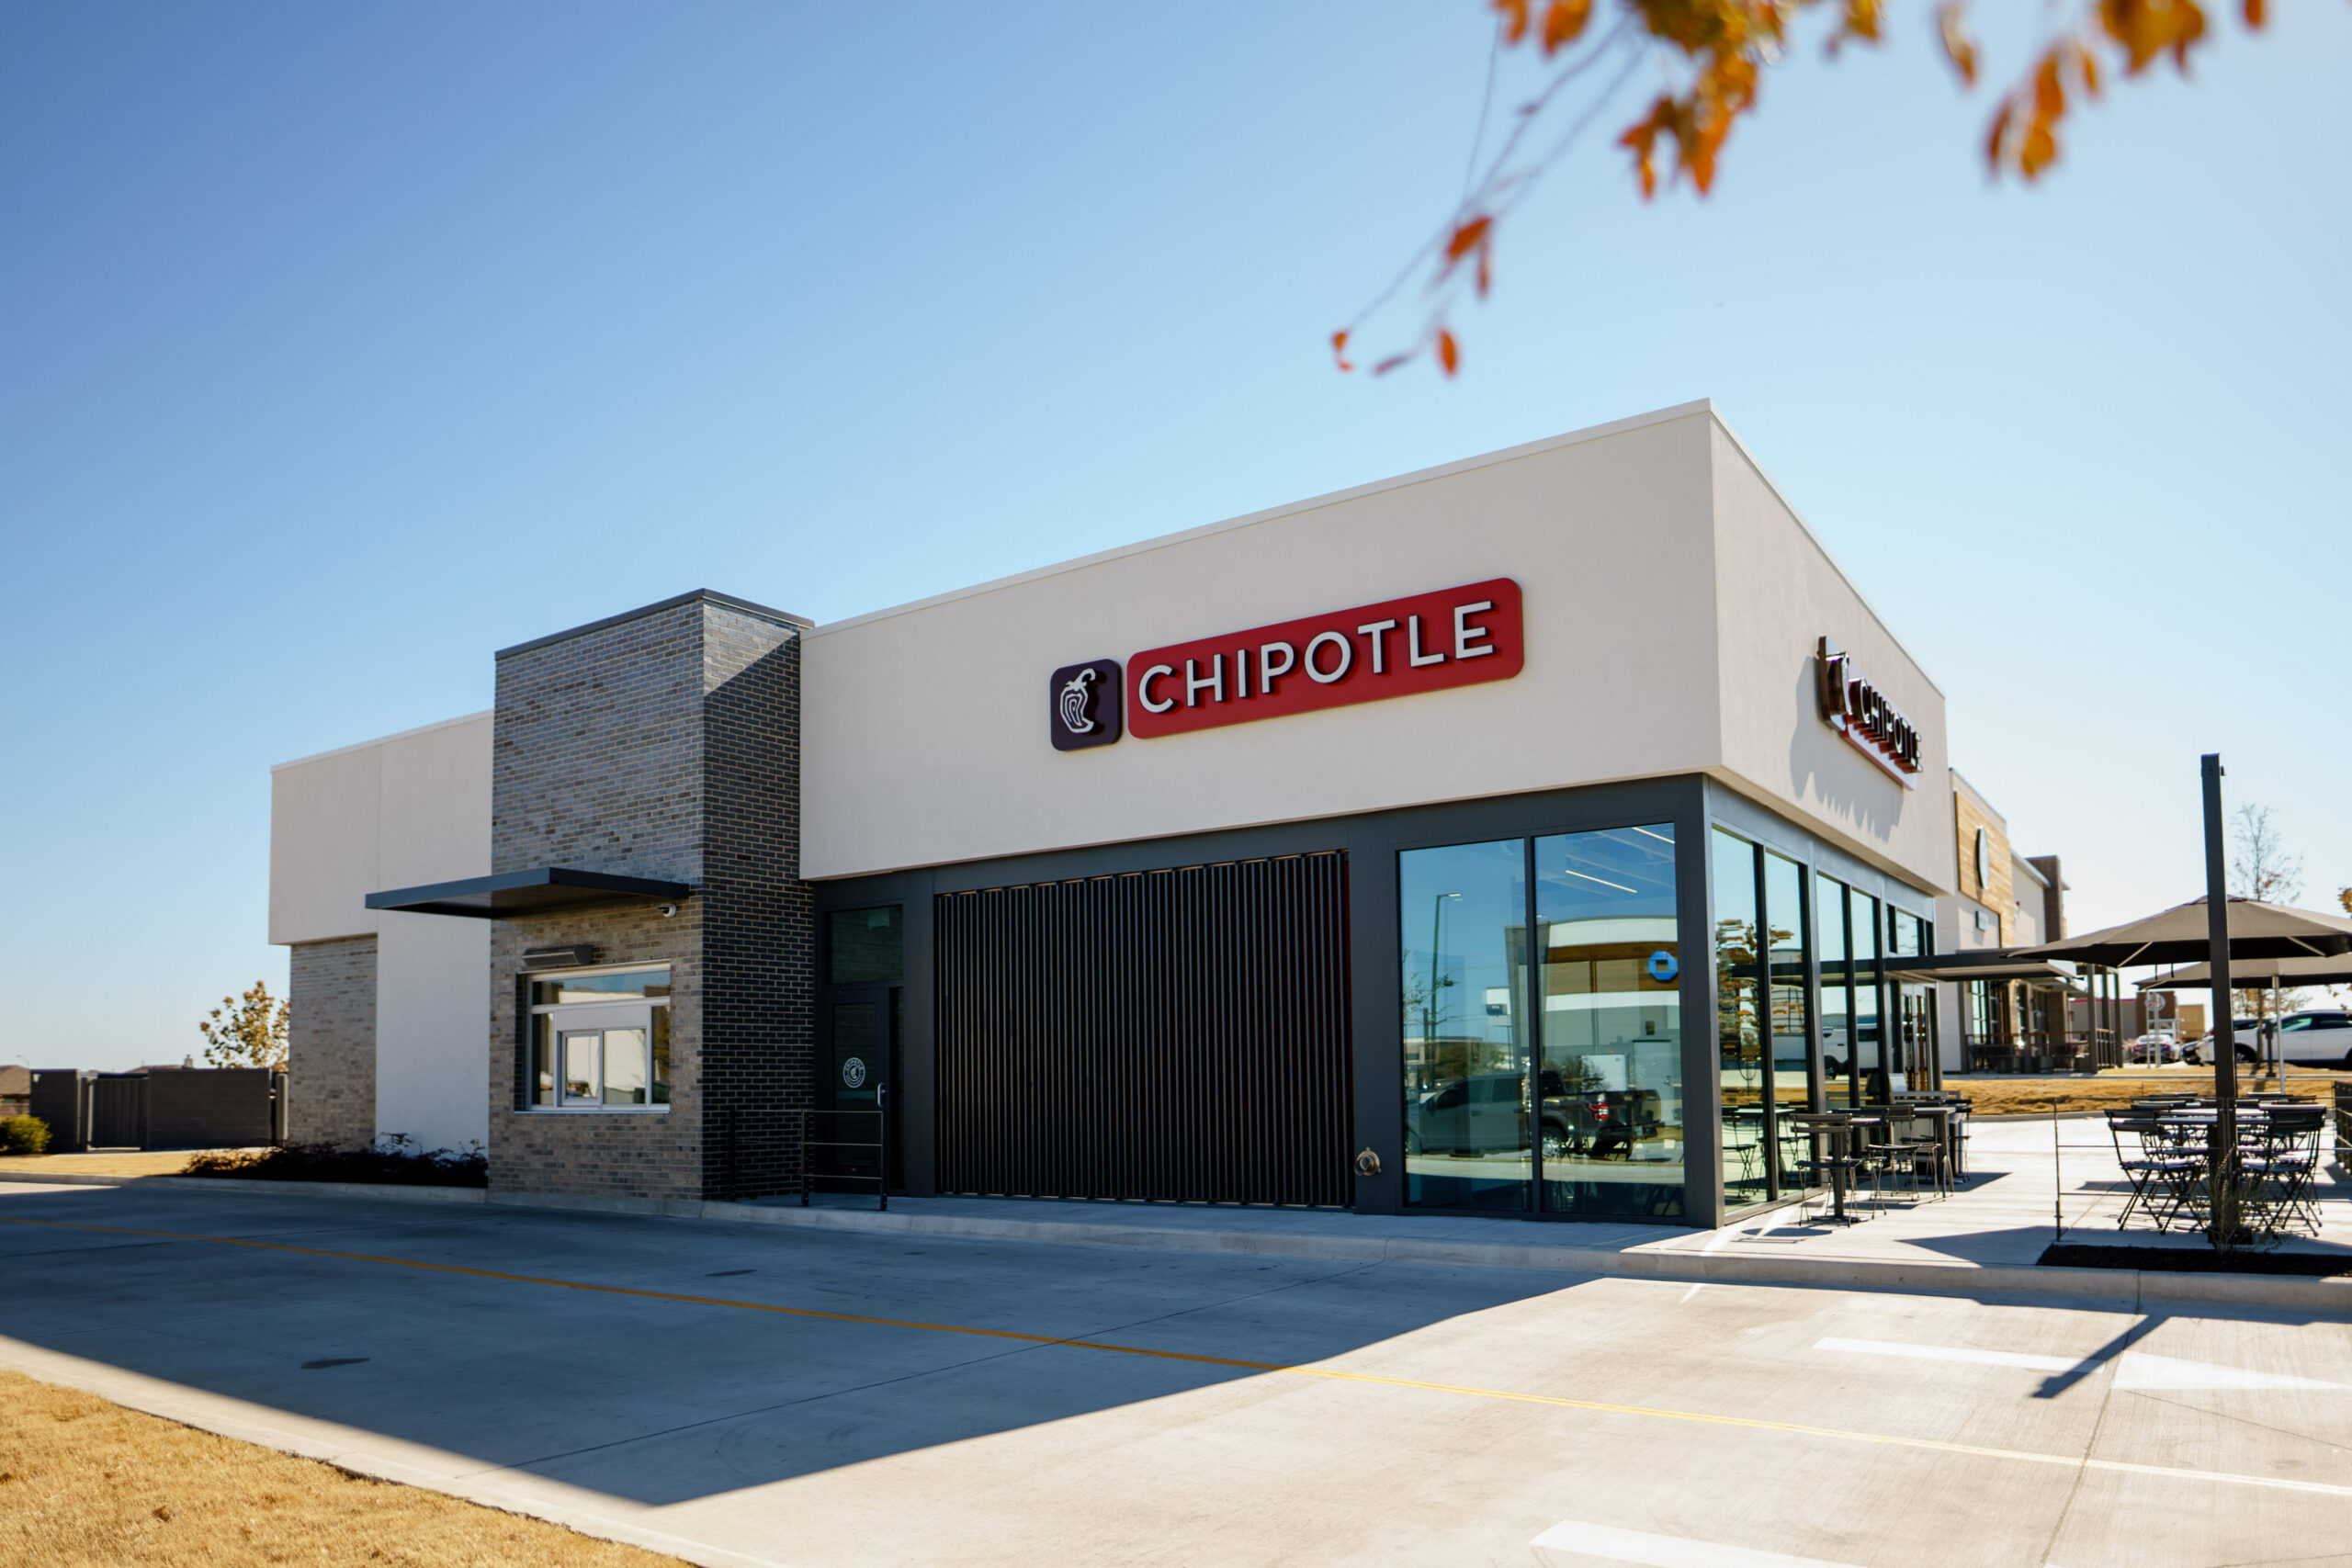 Does Chipotle take Apple Pay?